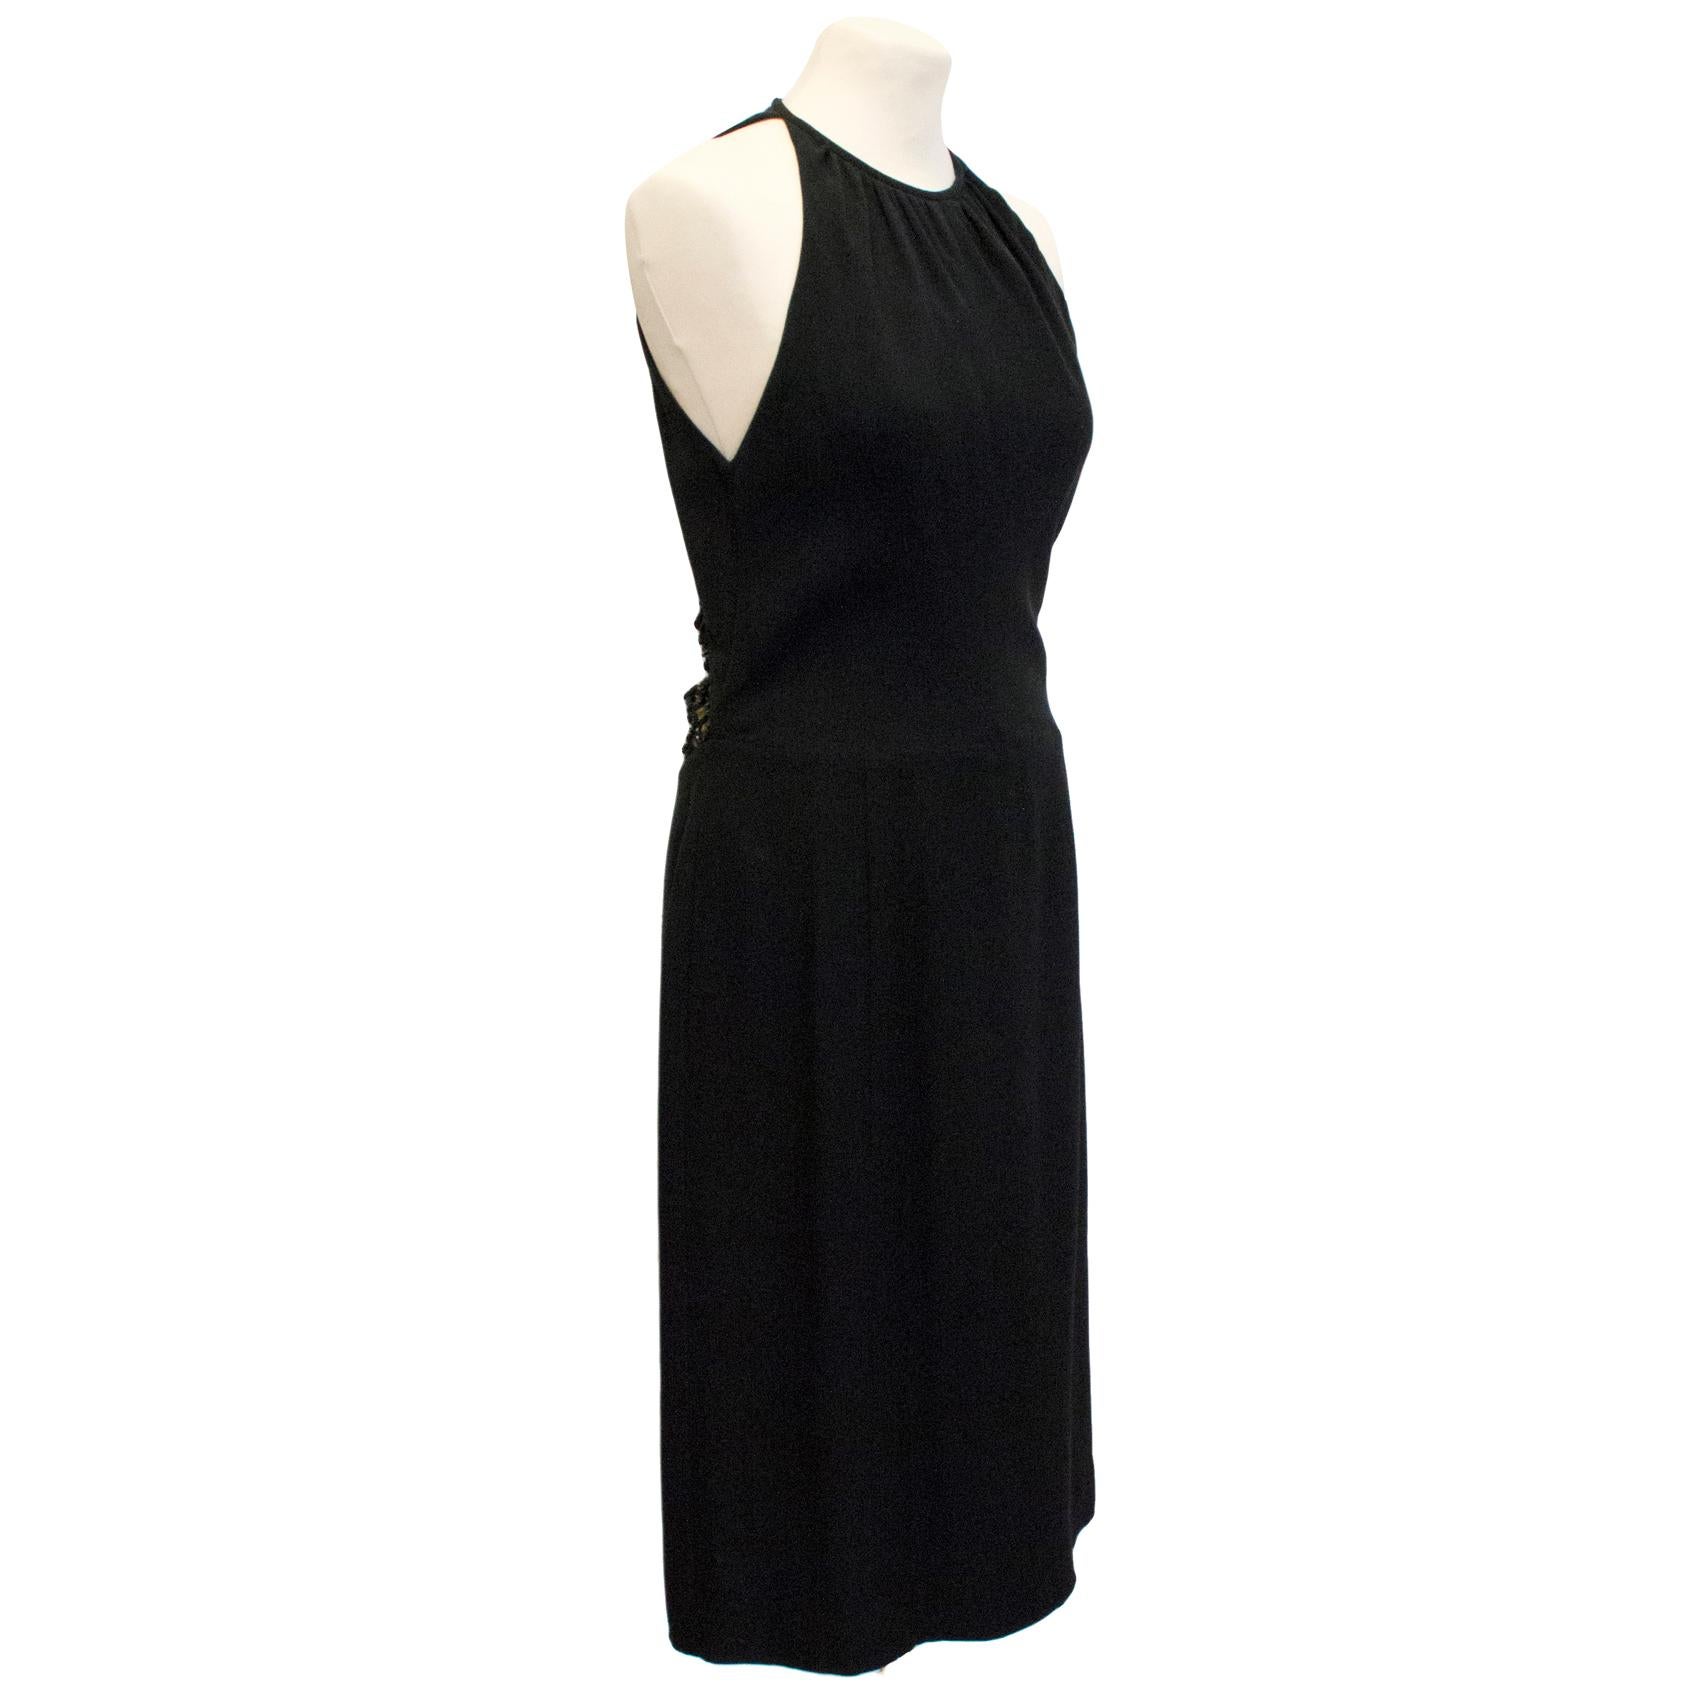 Valentino black beaded cocktail dress. Sleeveless. Low cut back with beaded embellishment. Fastens at the side with a hidden zip. High neckline. 

Please note: Some marks on the interior of the dress, see image 6, unnoticeable when worn. Some loose